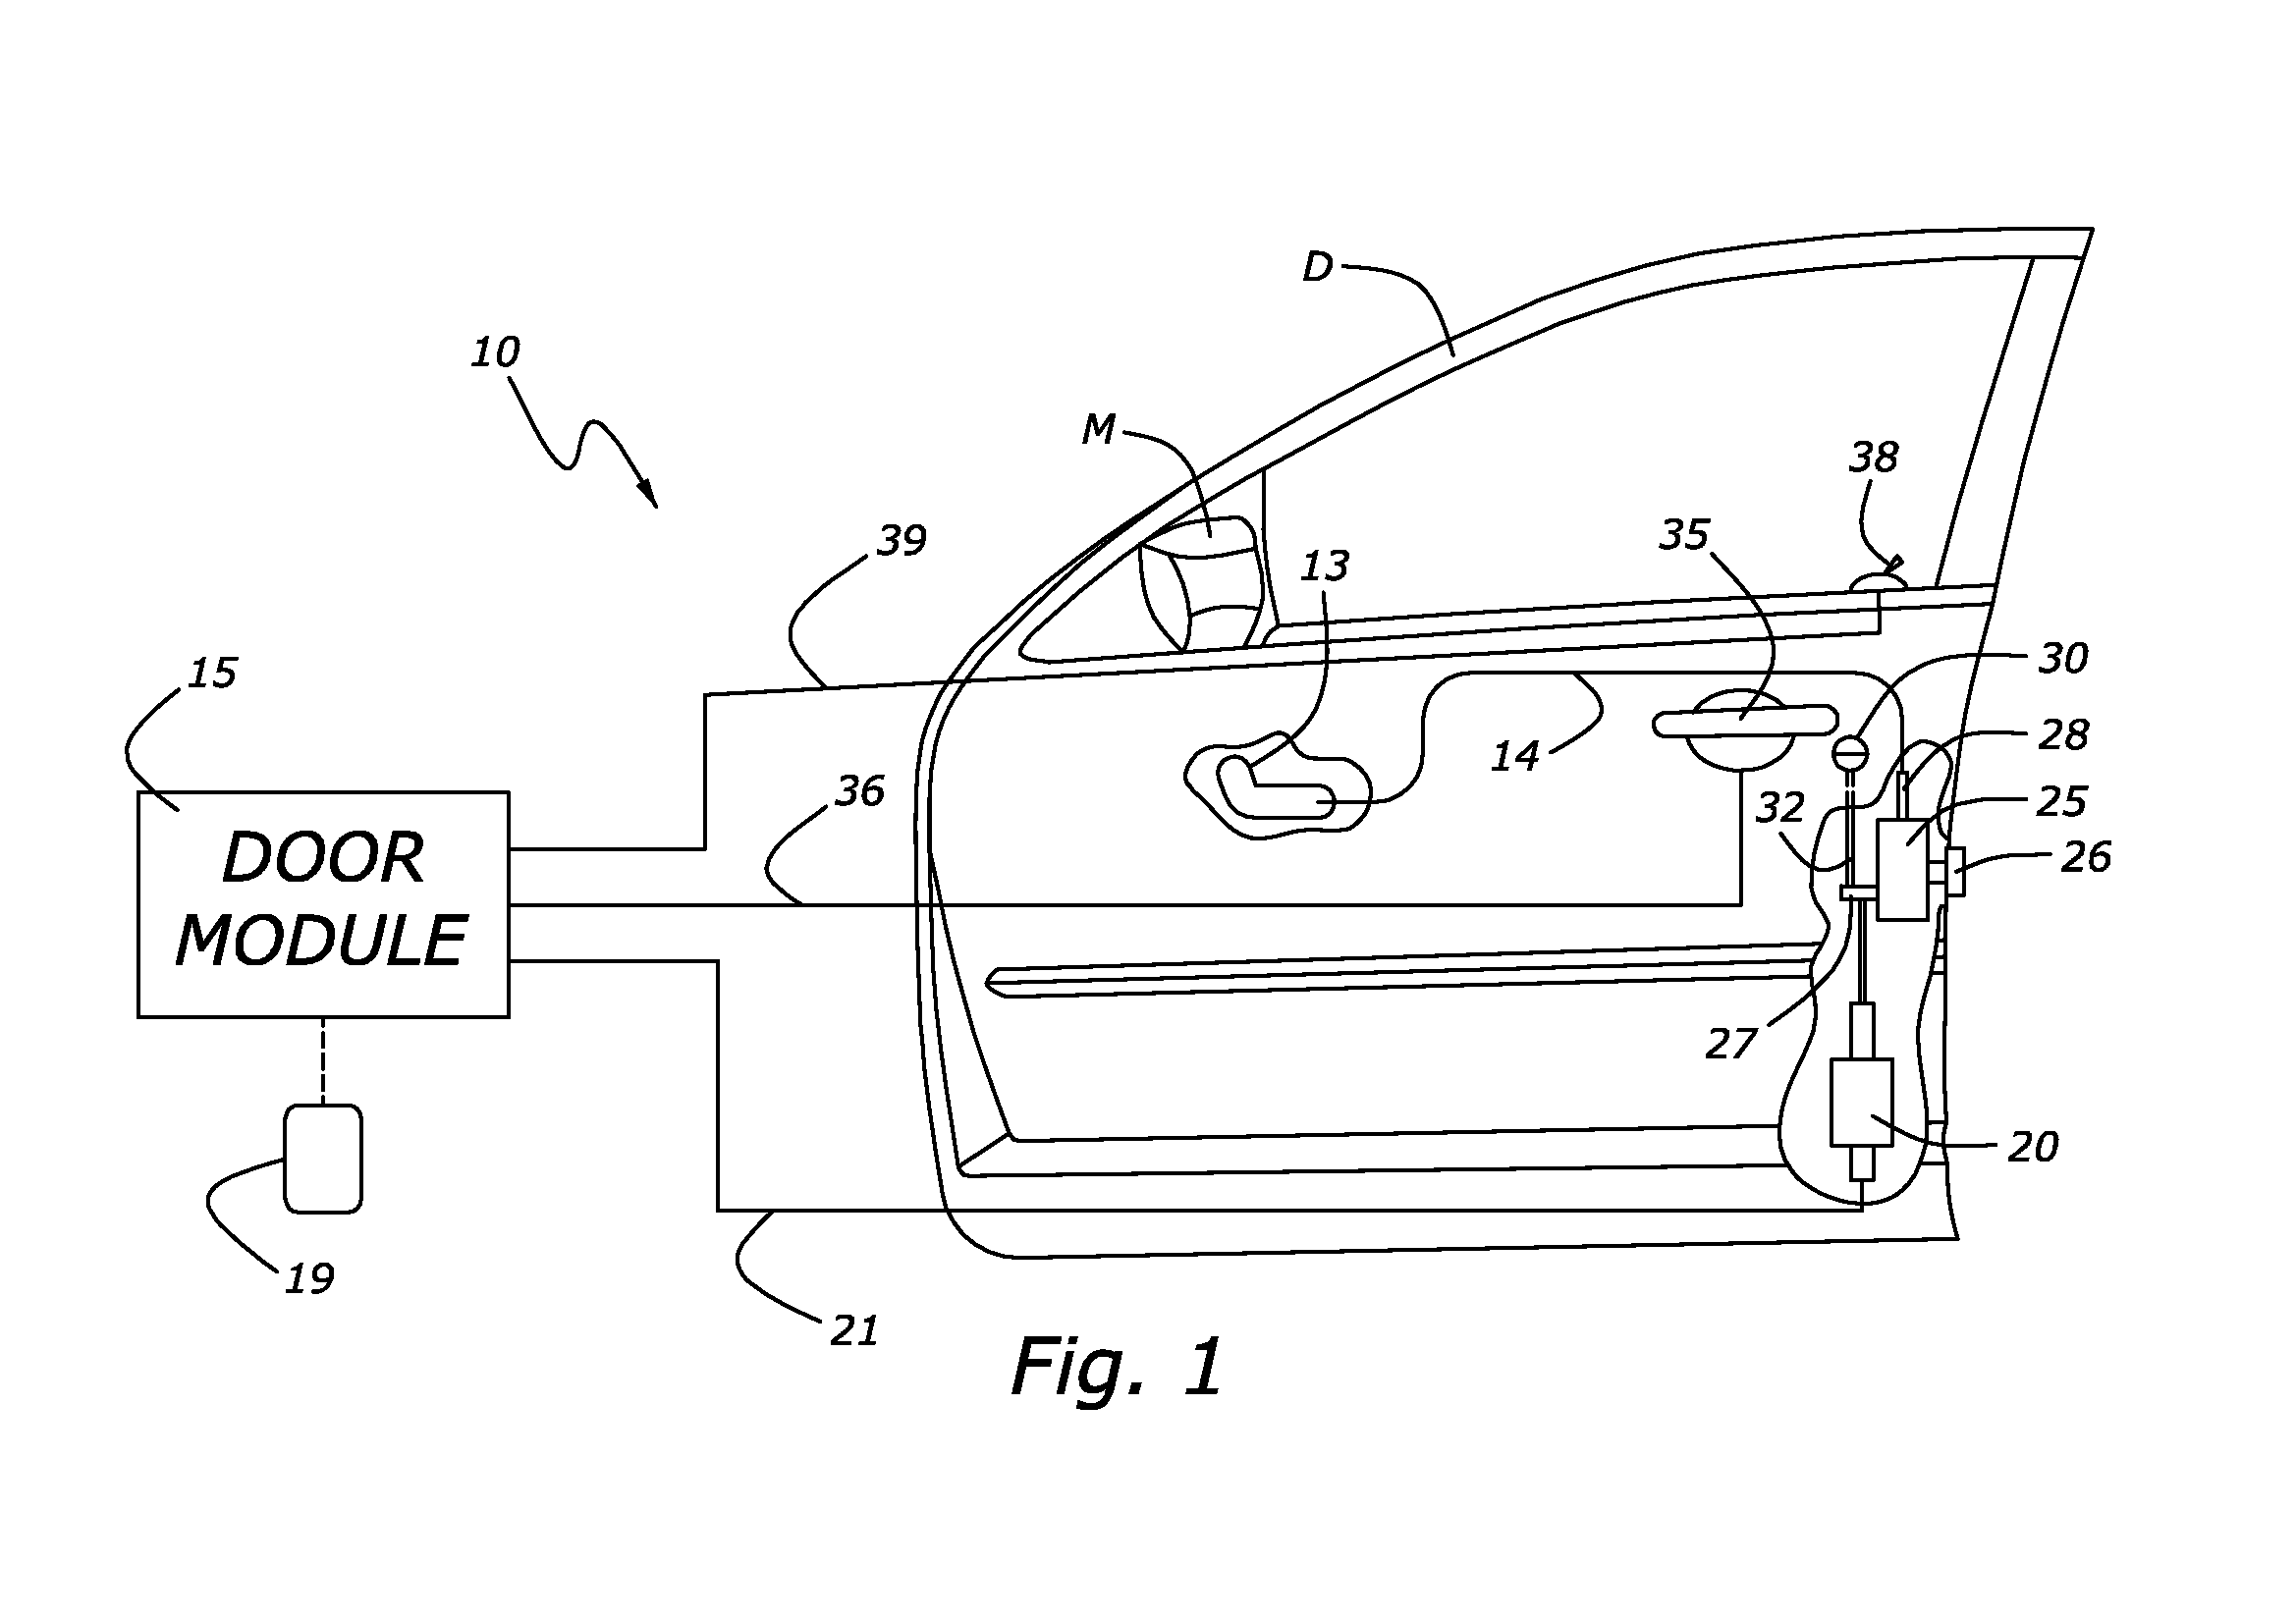 Passive Entry System for Automotive Vehicle Doors